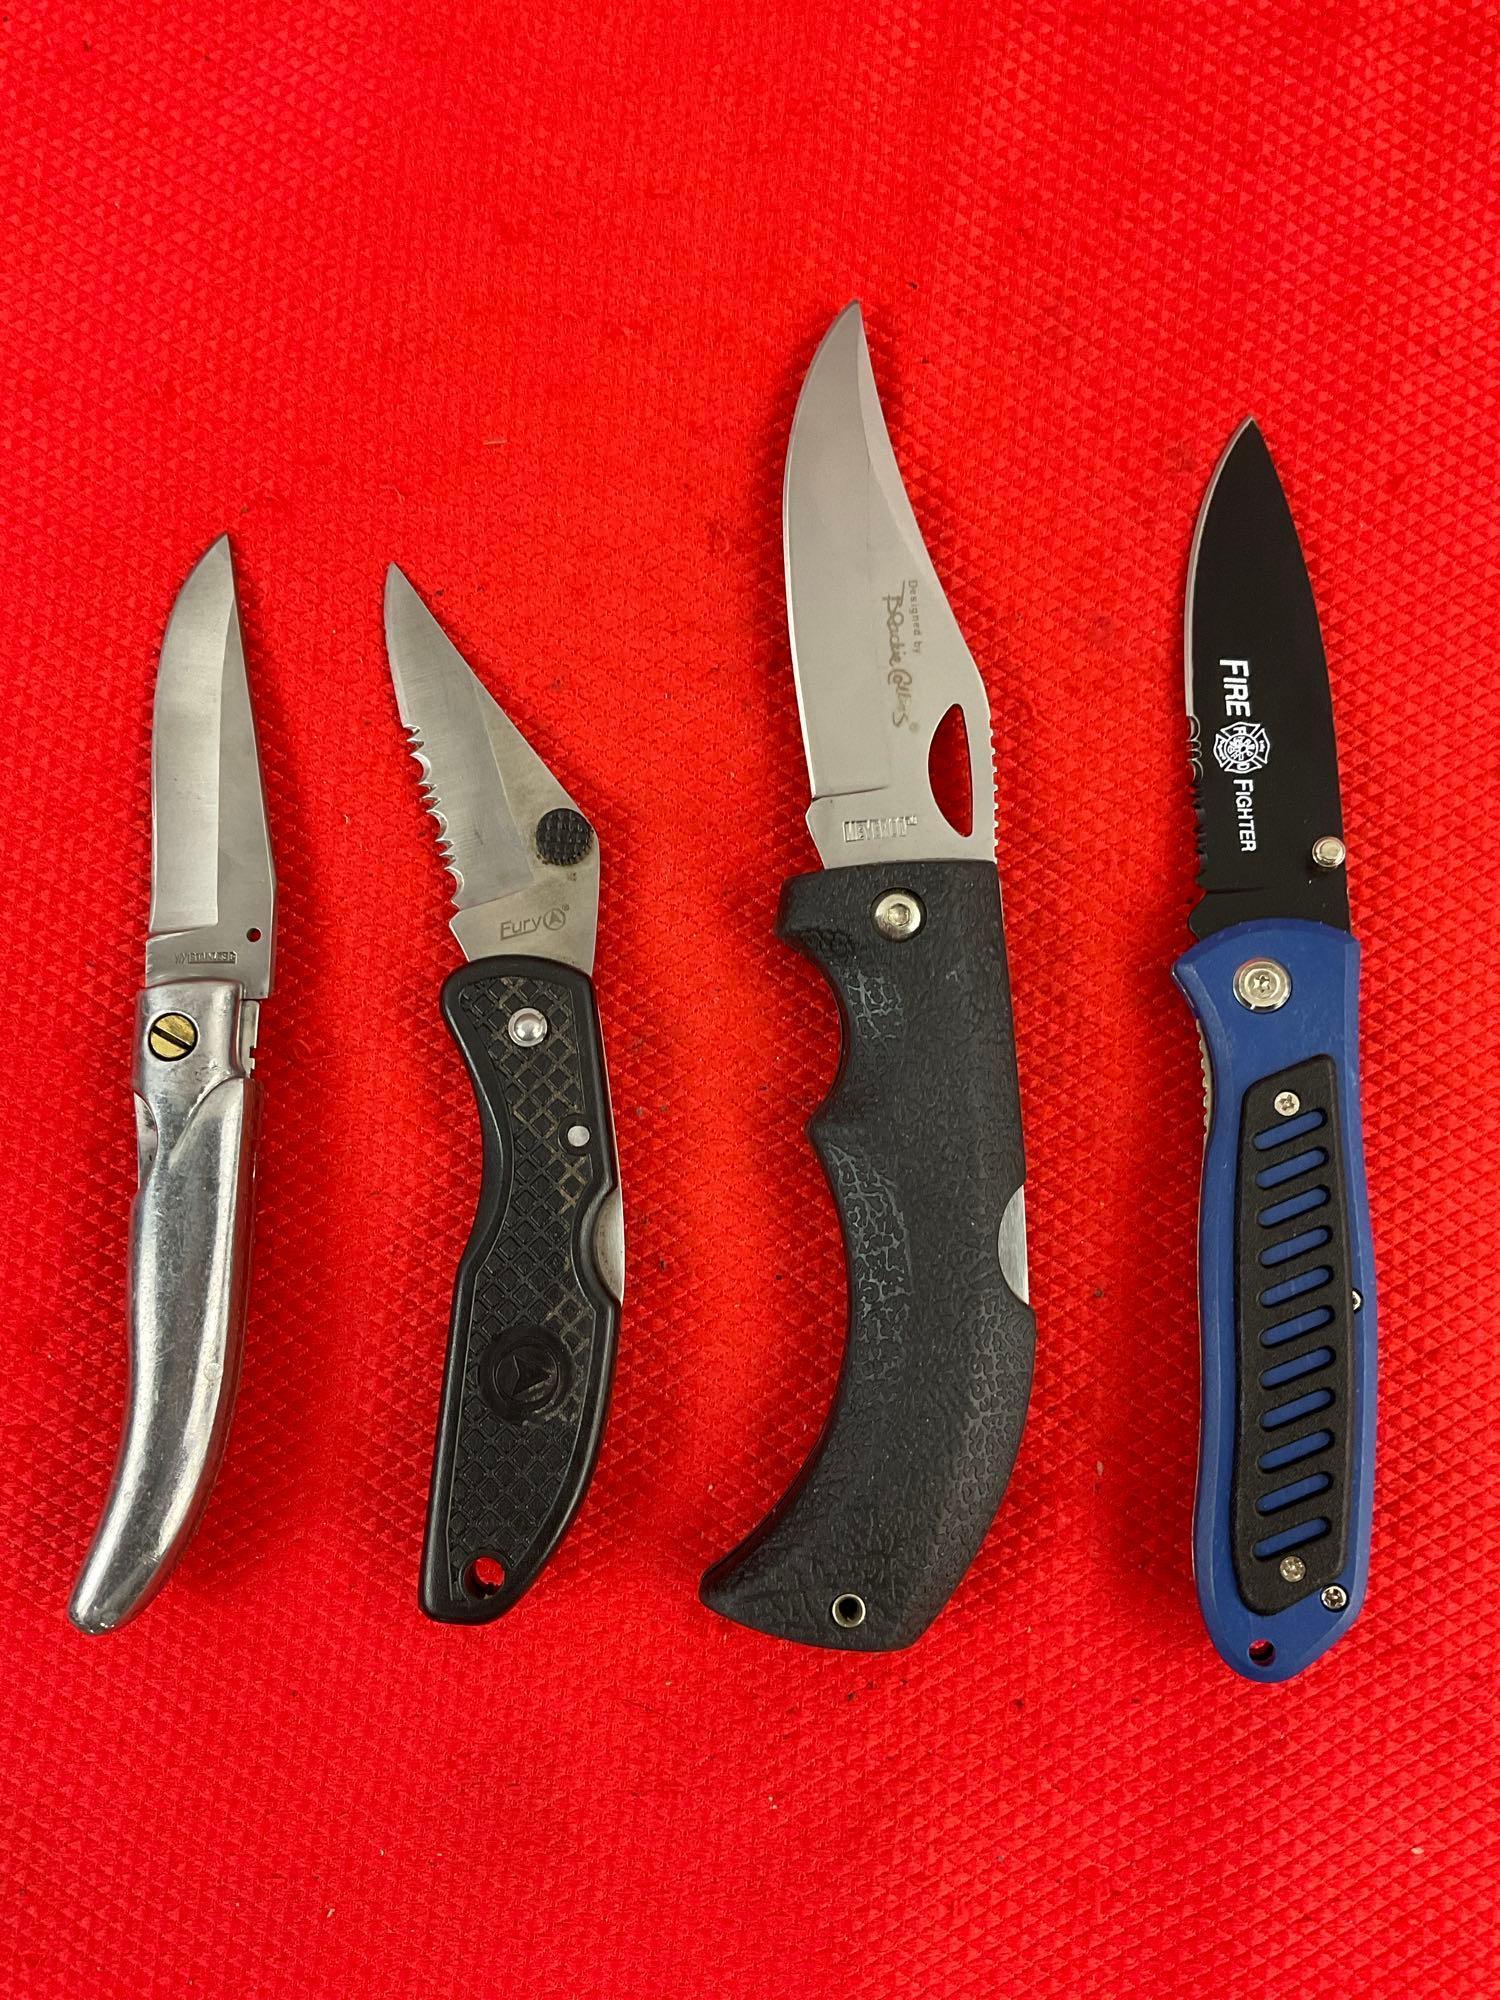 4 pcs Steel Folding Blade Pocket Knives Assortment. 1x MeyerCo, 1x Fury, 1x WY Stainless. See pics.